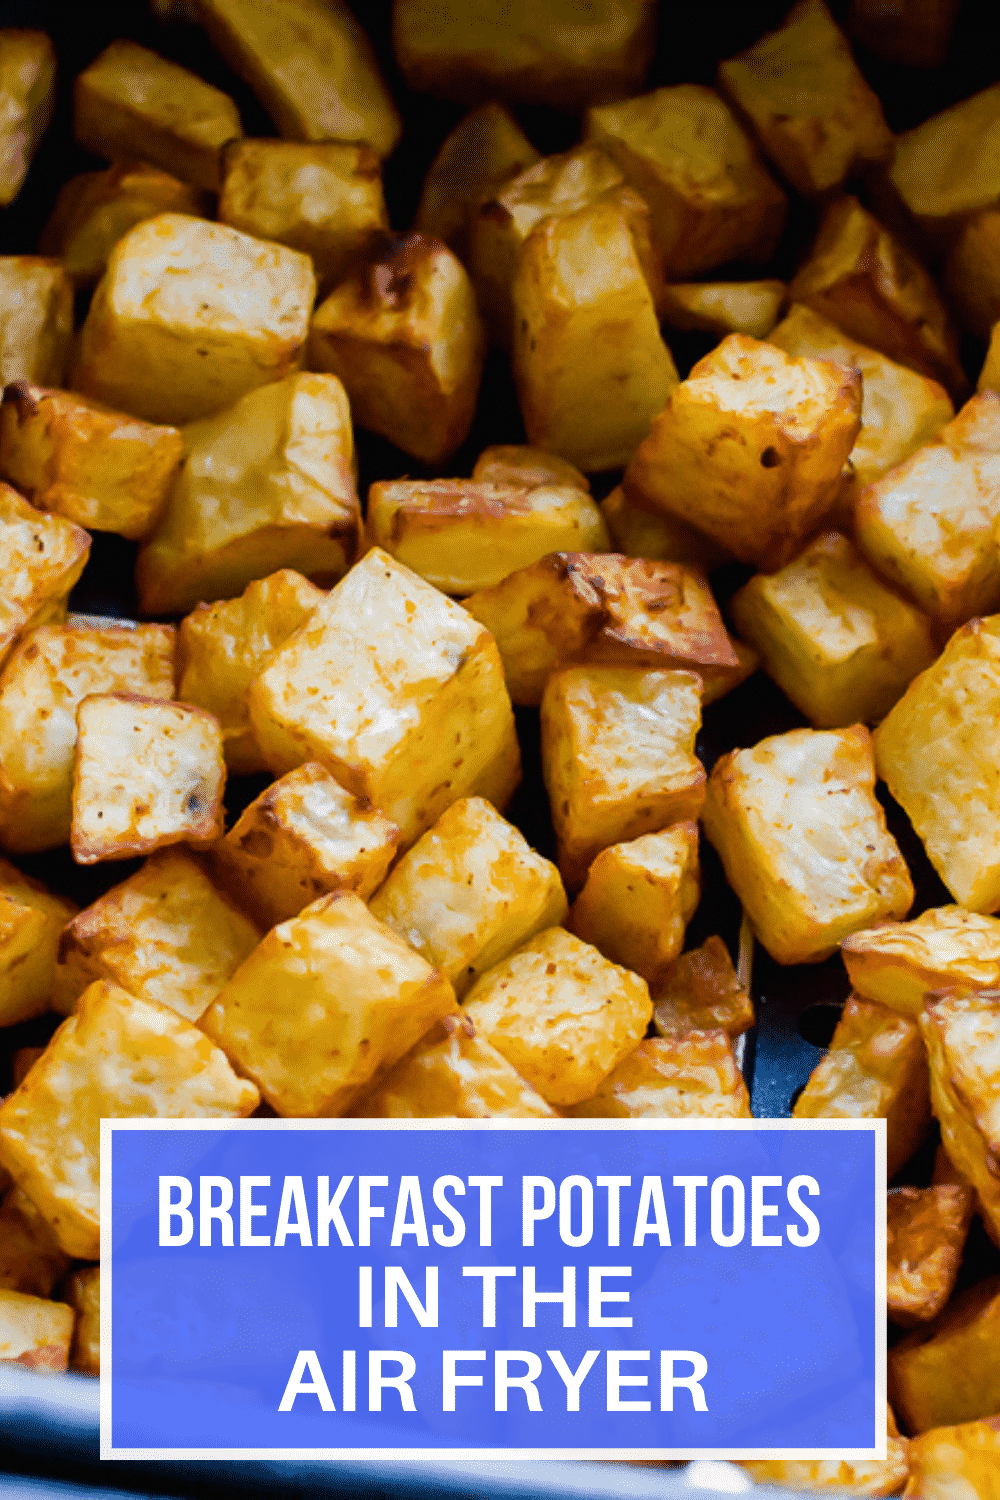 There is no better addition to a home cooked breakfast than crispy air fryer breakfast potatoes. Learn how to make this simple and healthy breakfast side in under 25 minutes. #breakfast via @vegetarianmamma